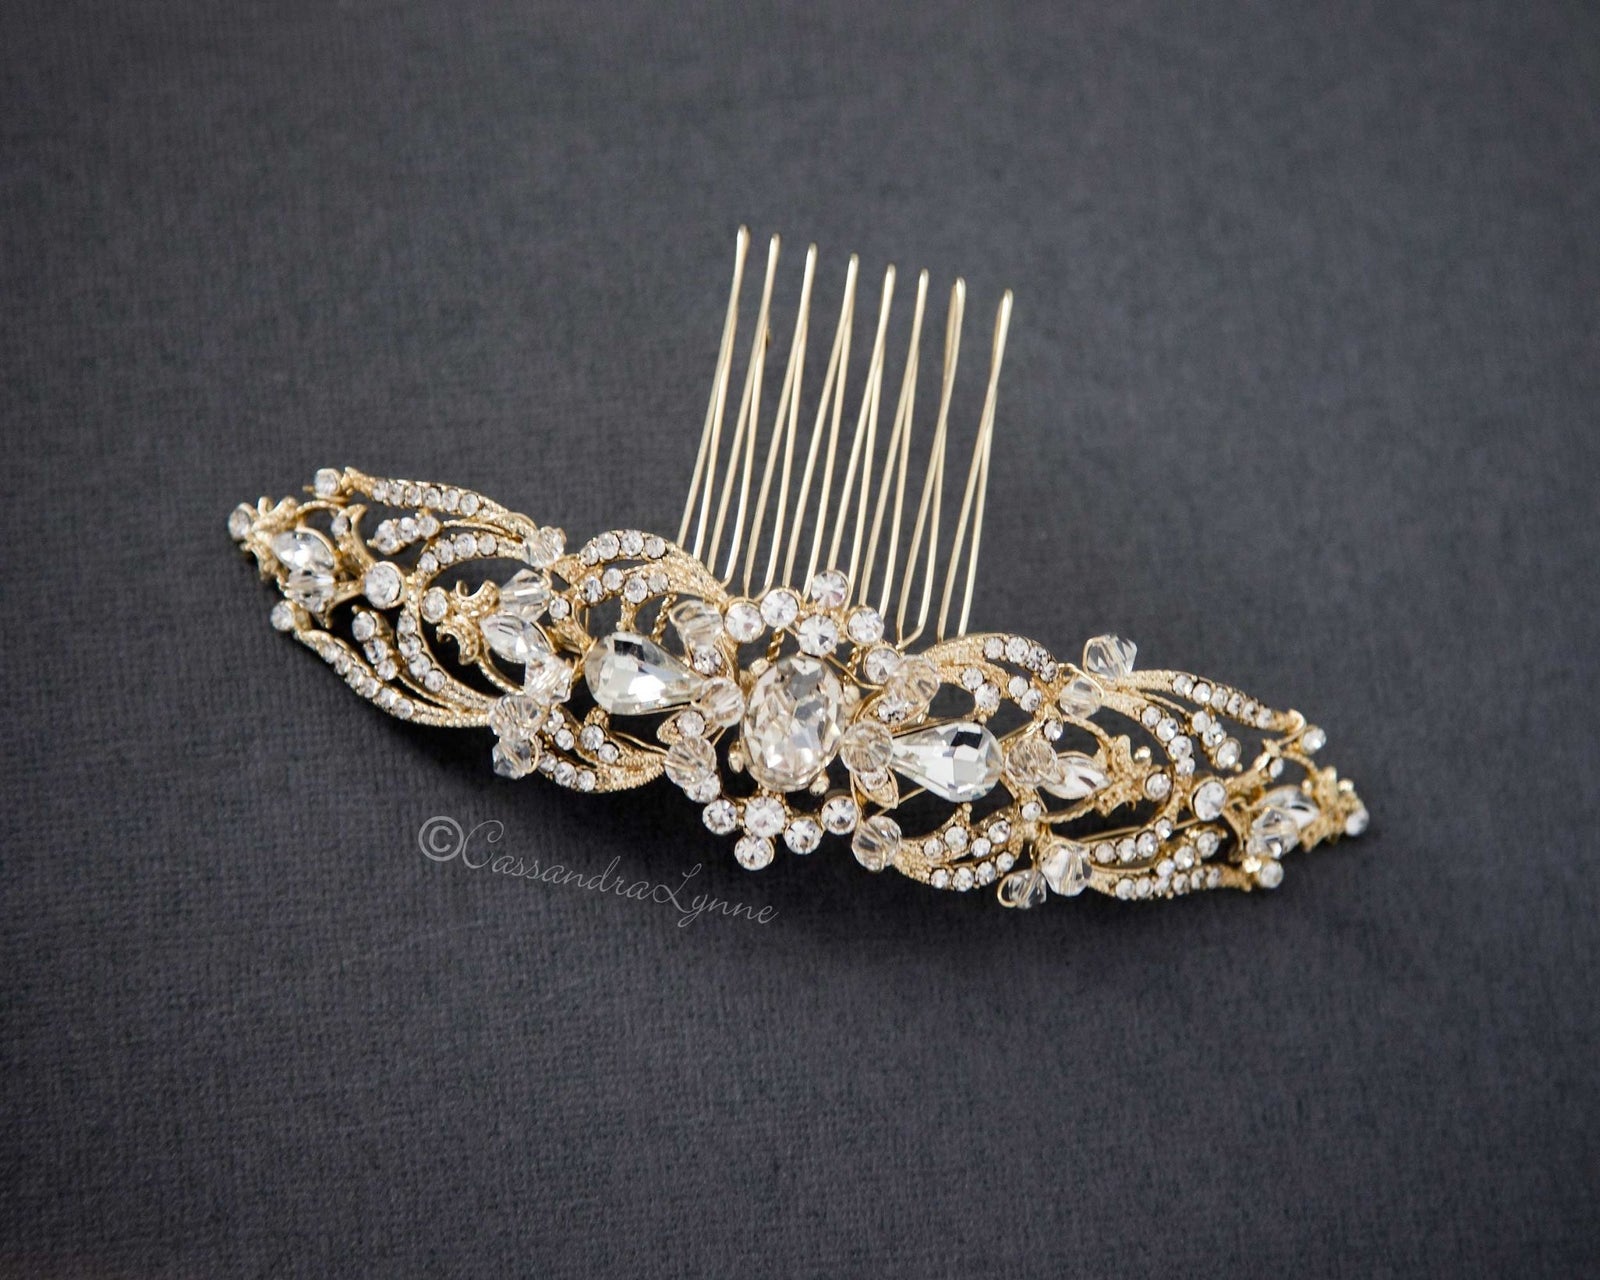 Bridal Hair Comb with Oval Jewel Center